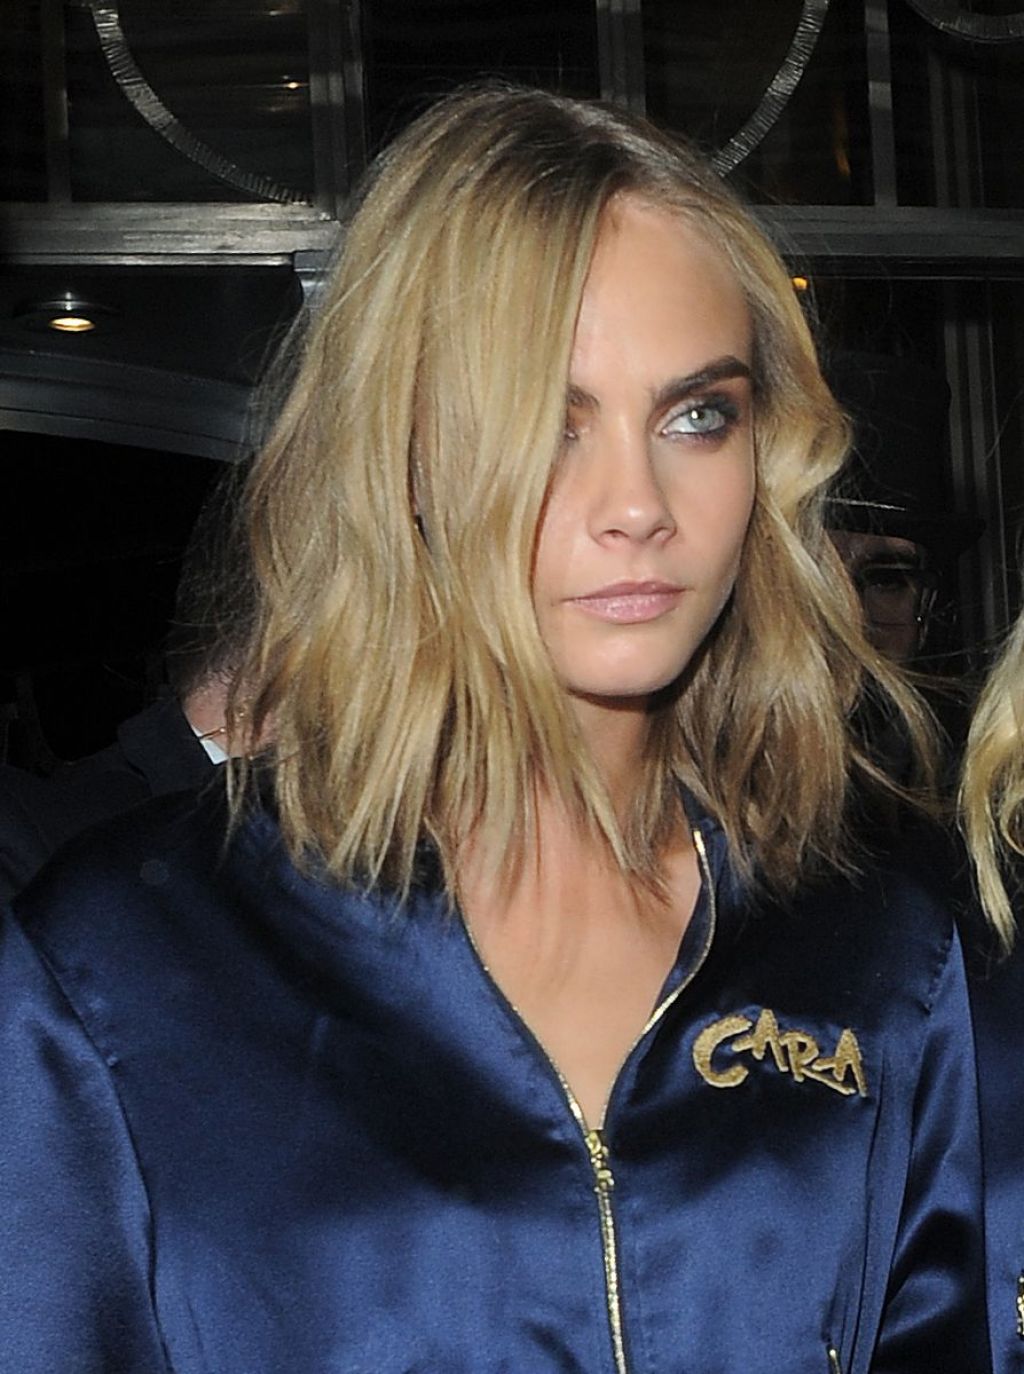 Cara Delevingne & Margot Robbie - Out Partying in Matching Tracksuits 08/04/2016